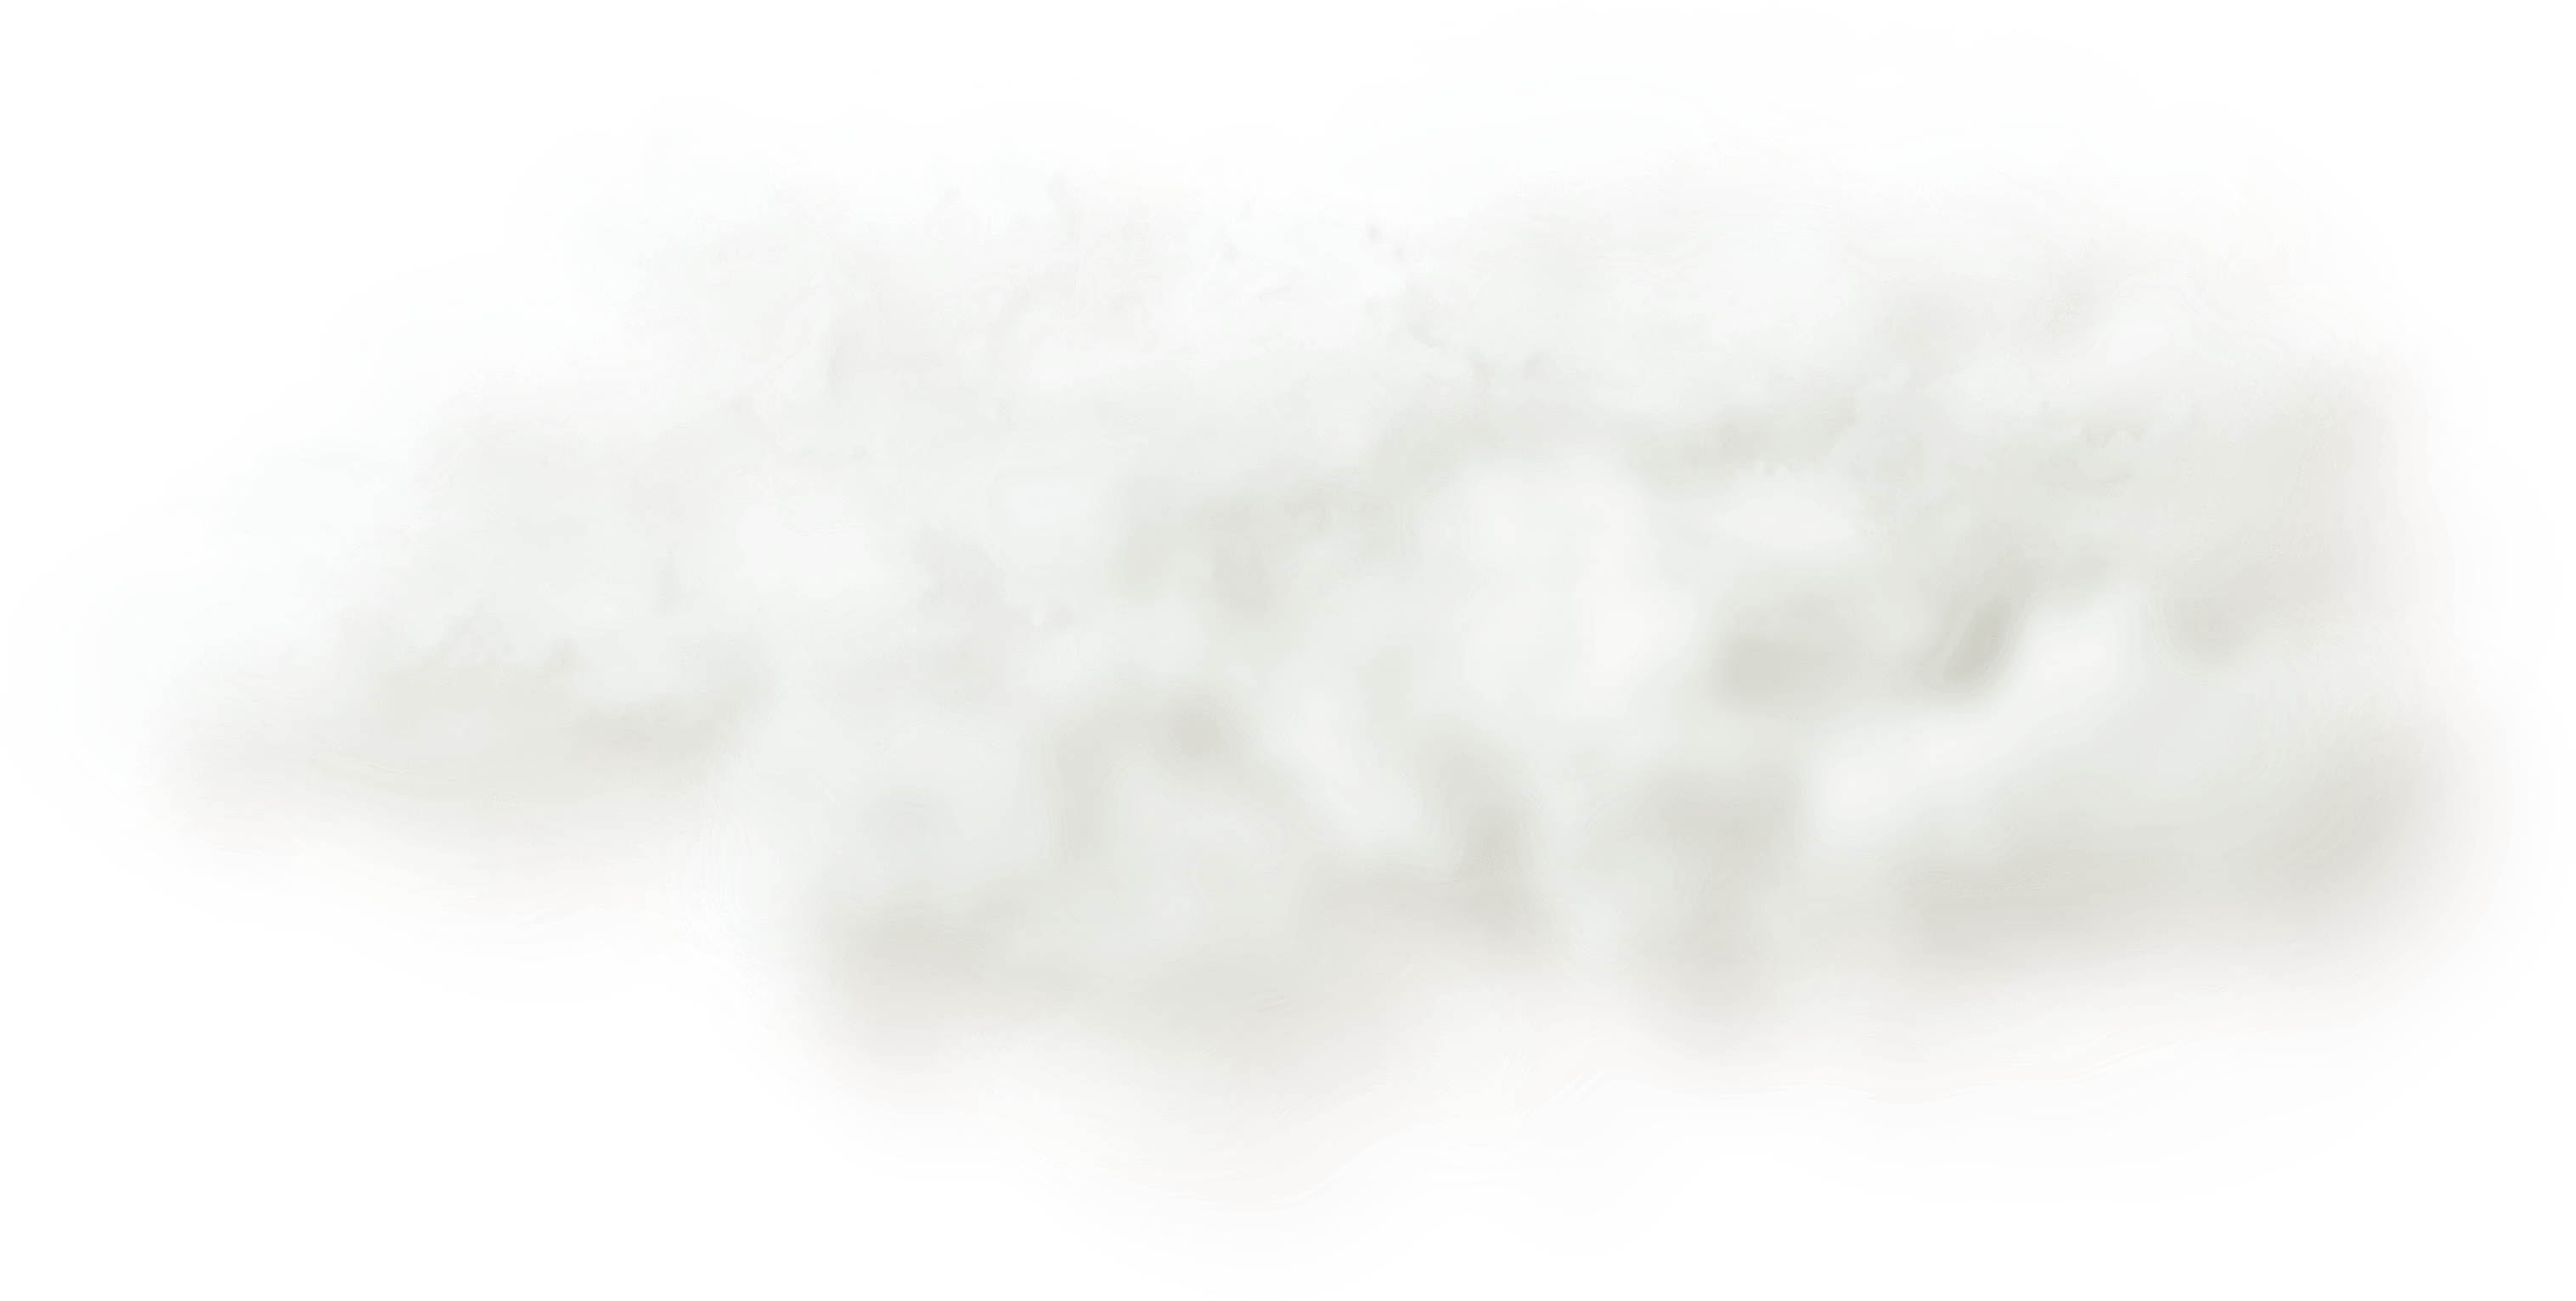 Clouds PNG HD Images Transparent Clouds HD Images.PNG Images. | PlusPNG